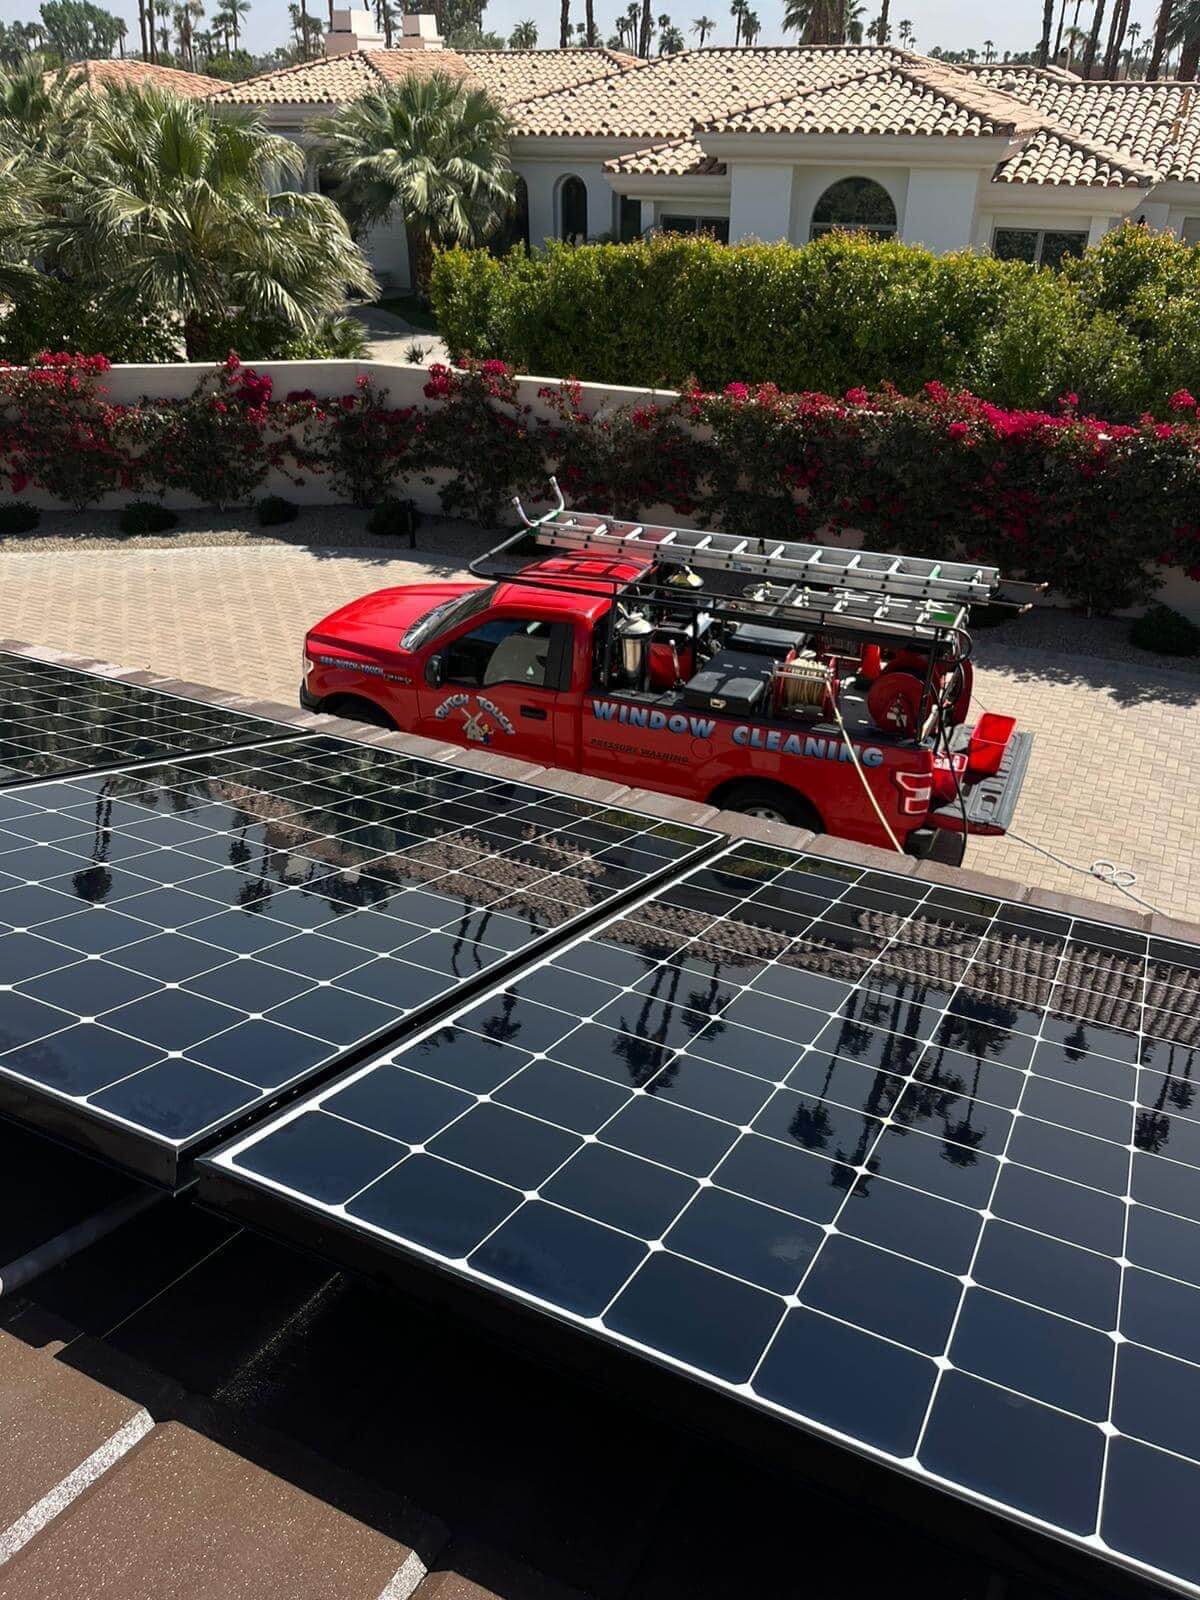 Solar panel cleaning services in Southern California